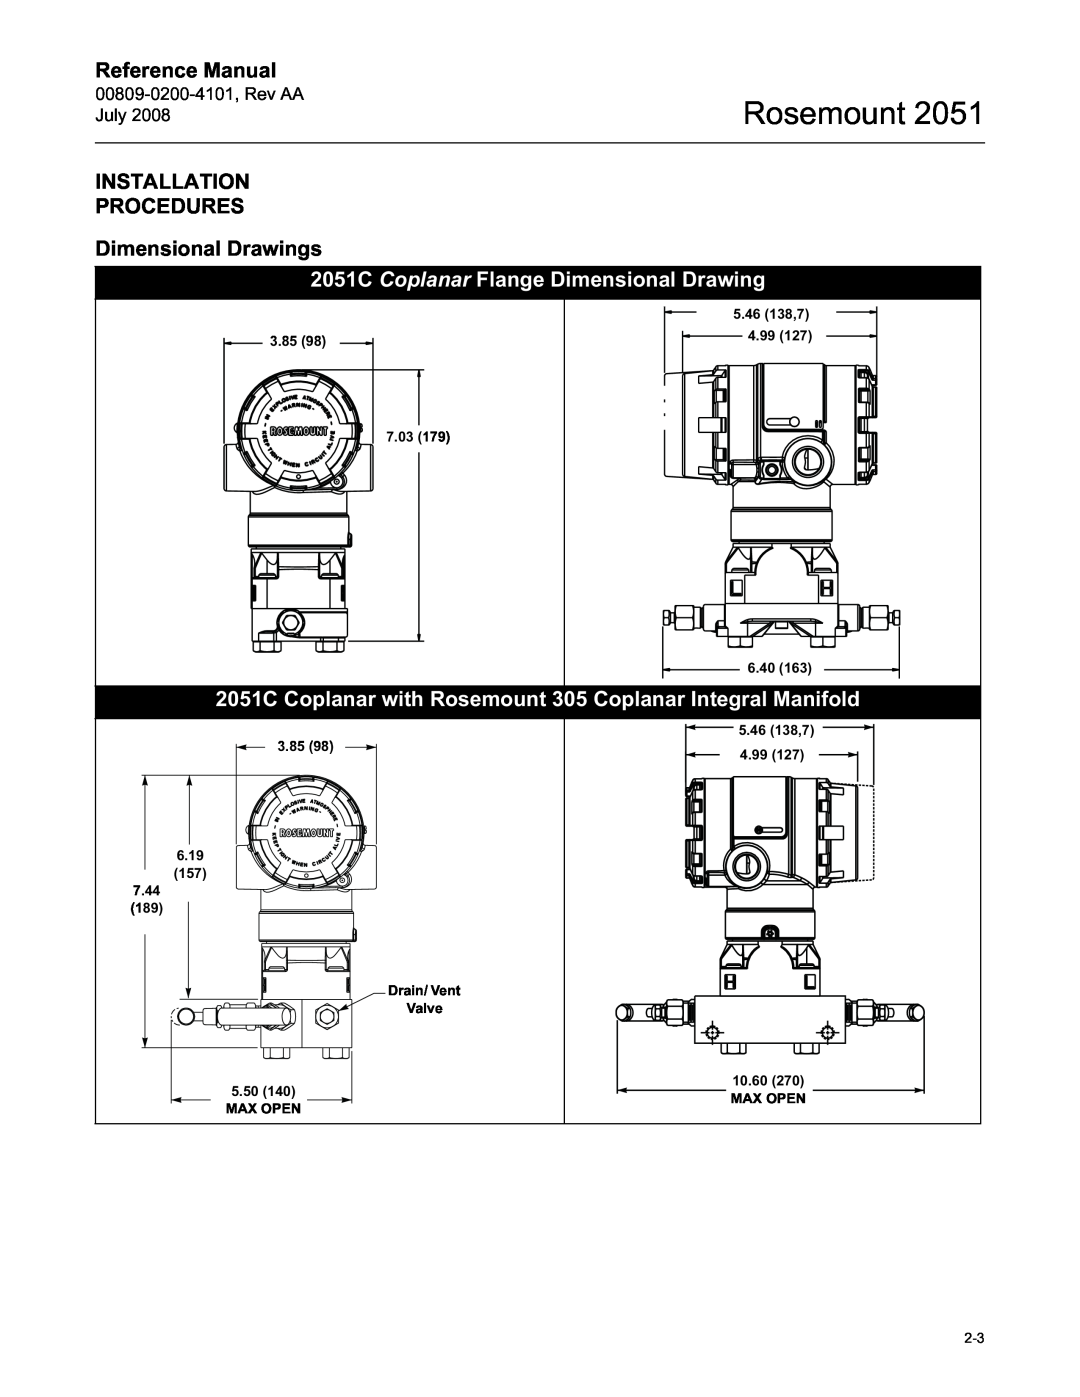 Emerson Process Management Installation Procedures, Dimensional Drawings, 2051C Coplanar Flange Dimensional Drawing 